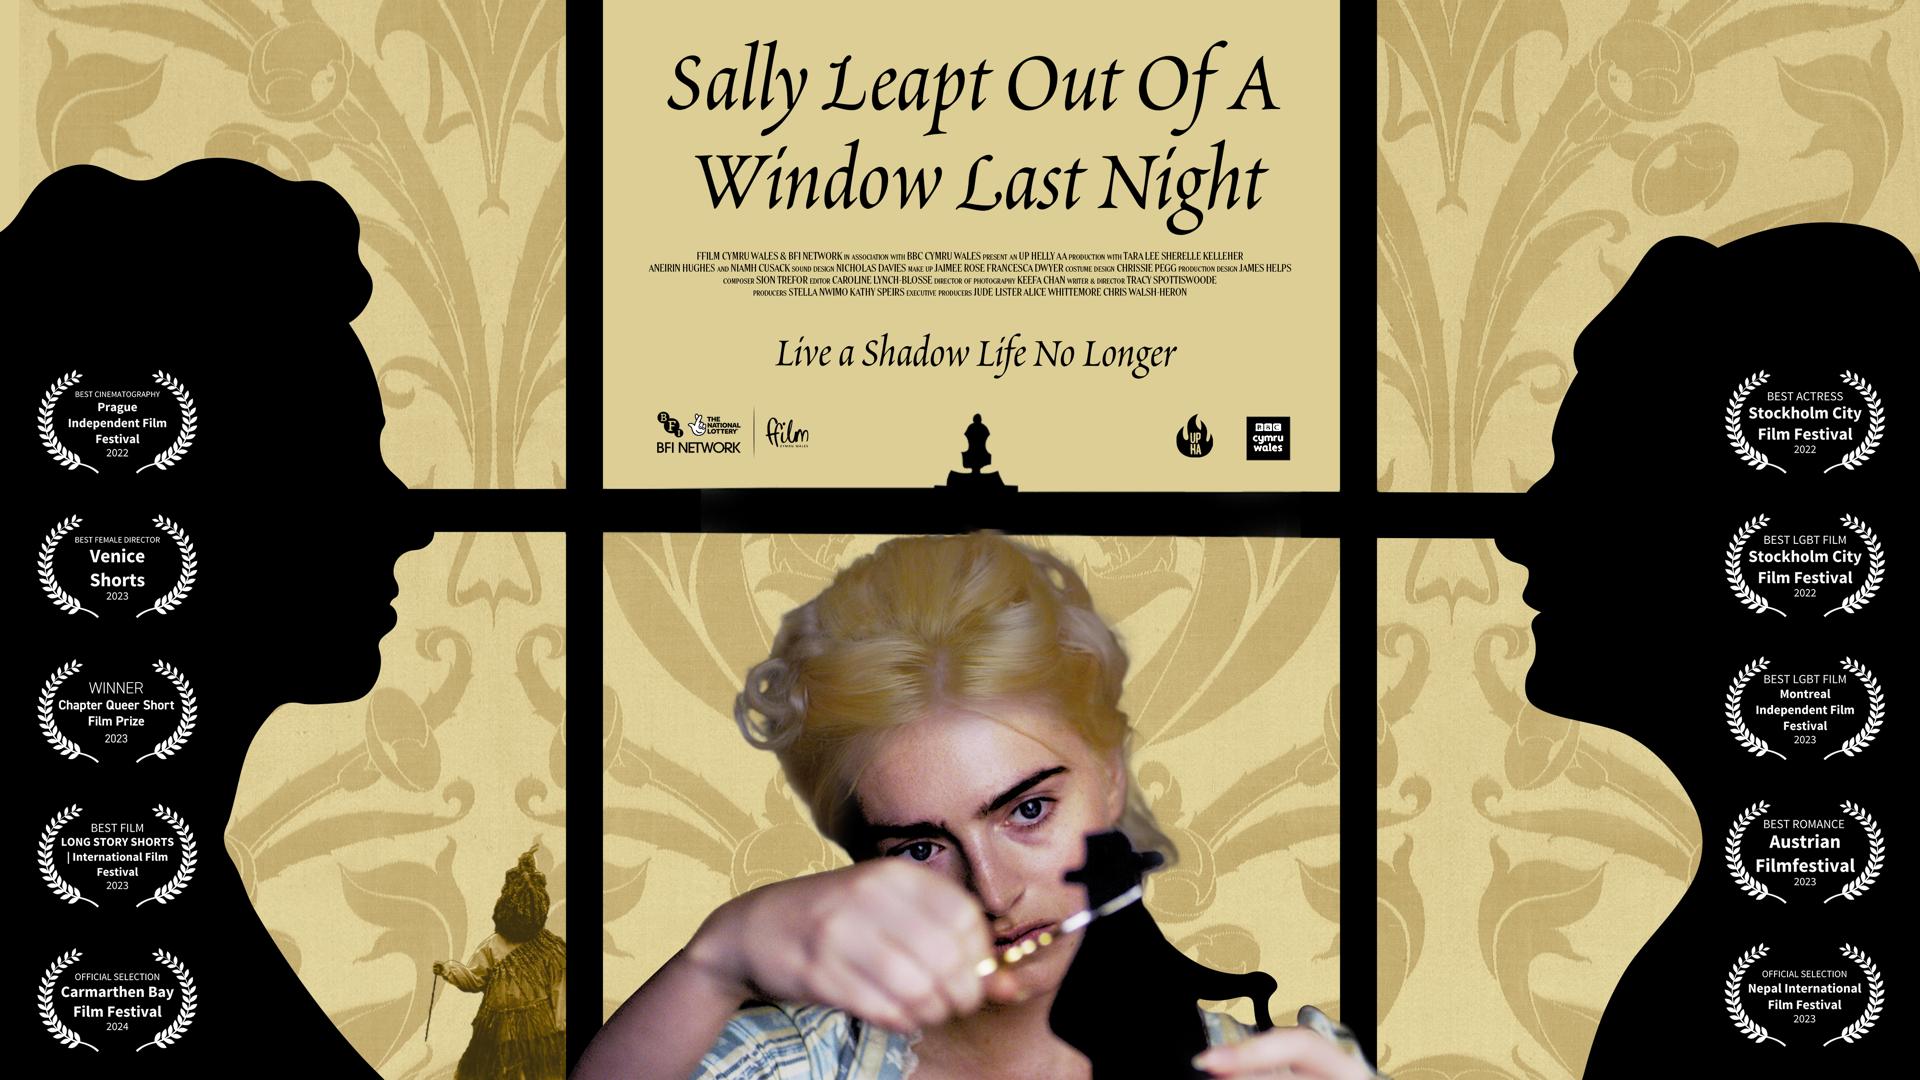 Sally Leapt Out Of A Window Last Night